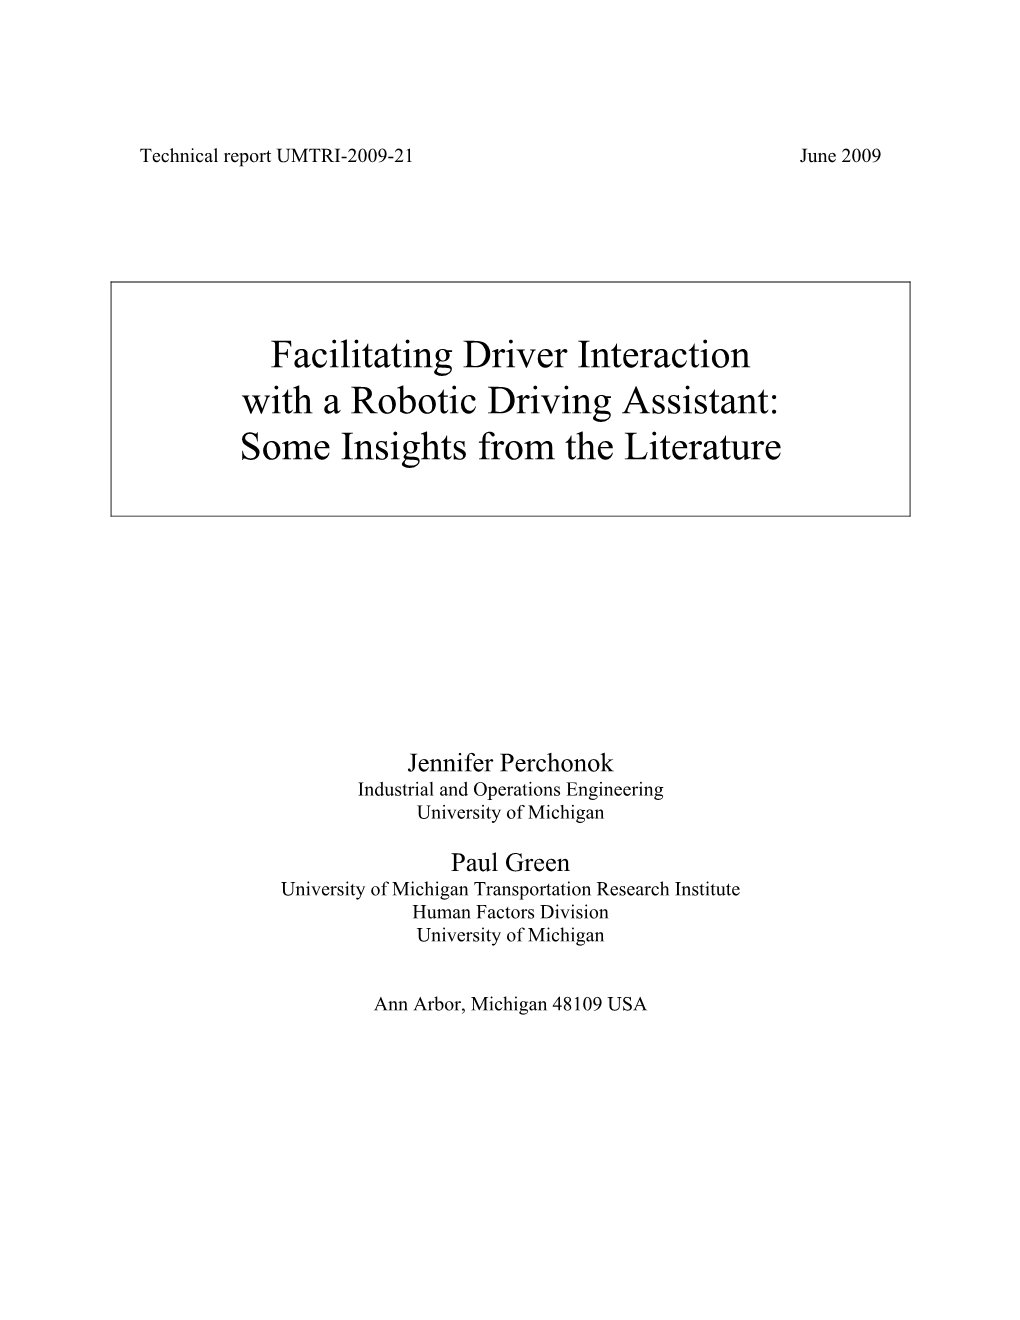 Facilitating Driver Interaction with a Robotic Driving Assistant: Some Insights from the Literature